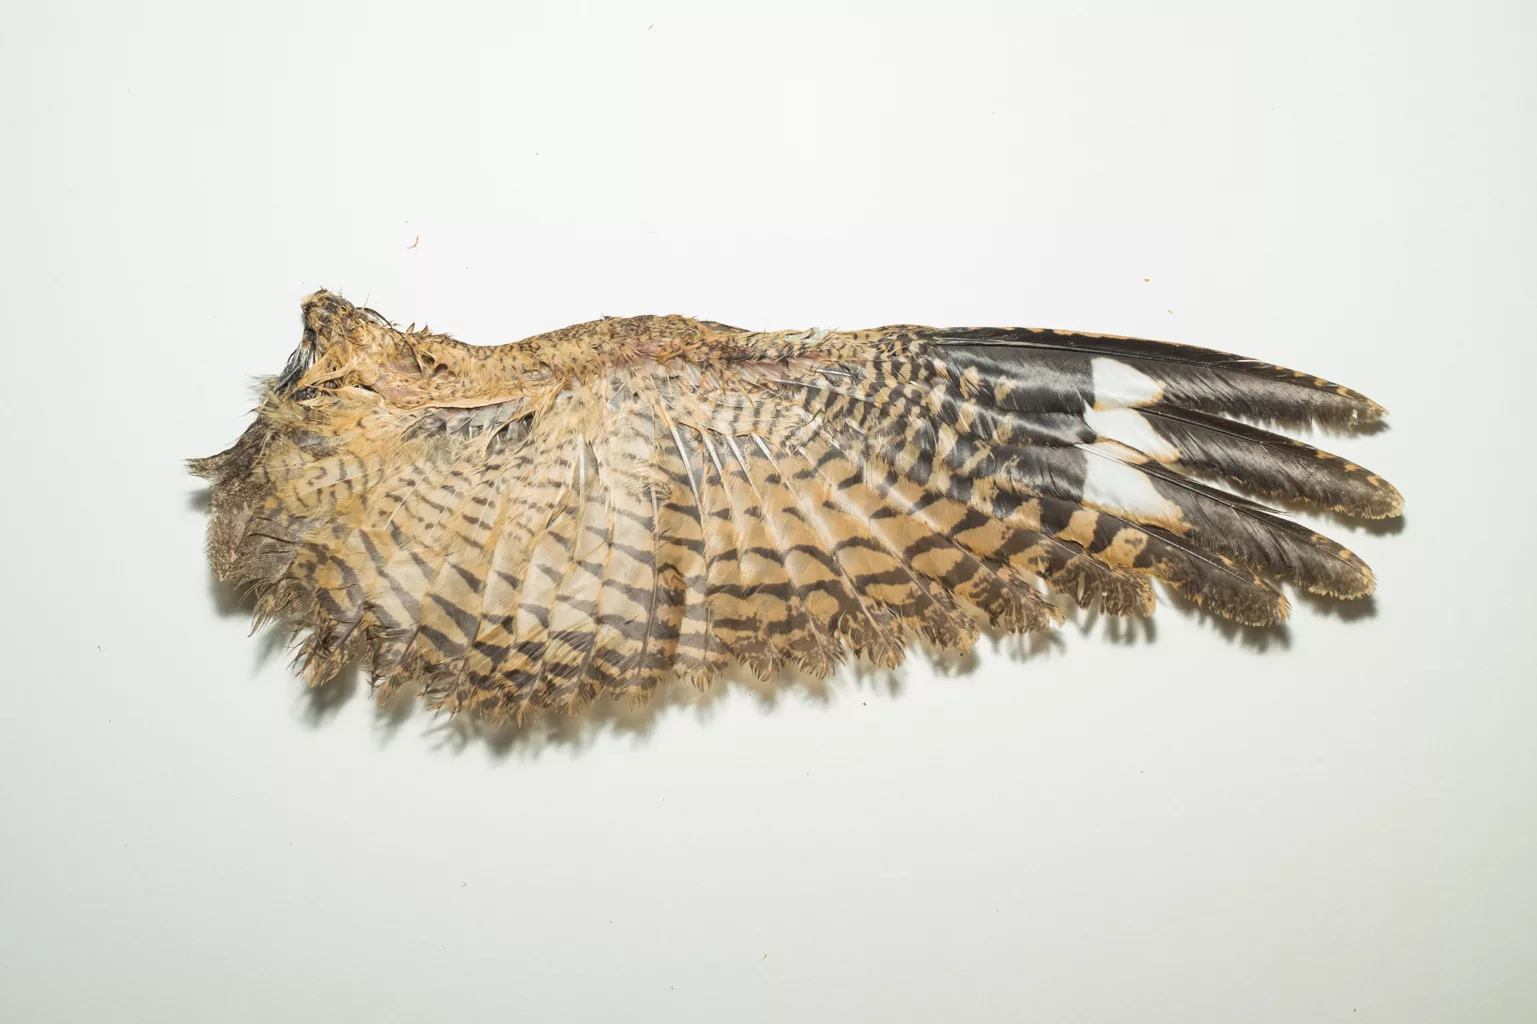 Full Wing - Ventral View